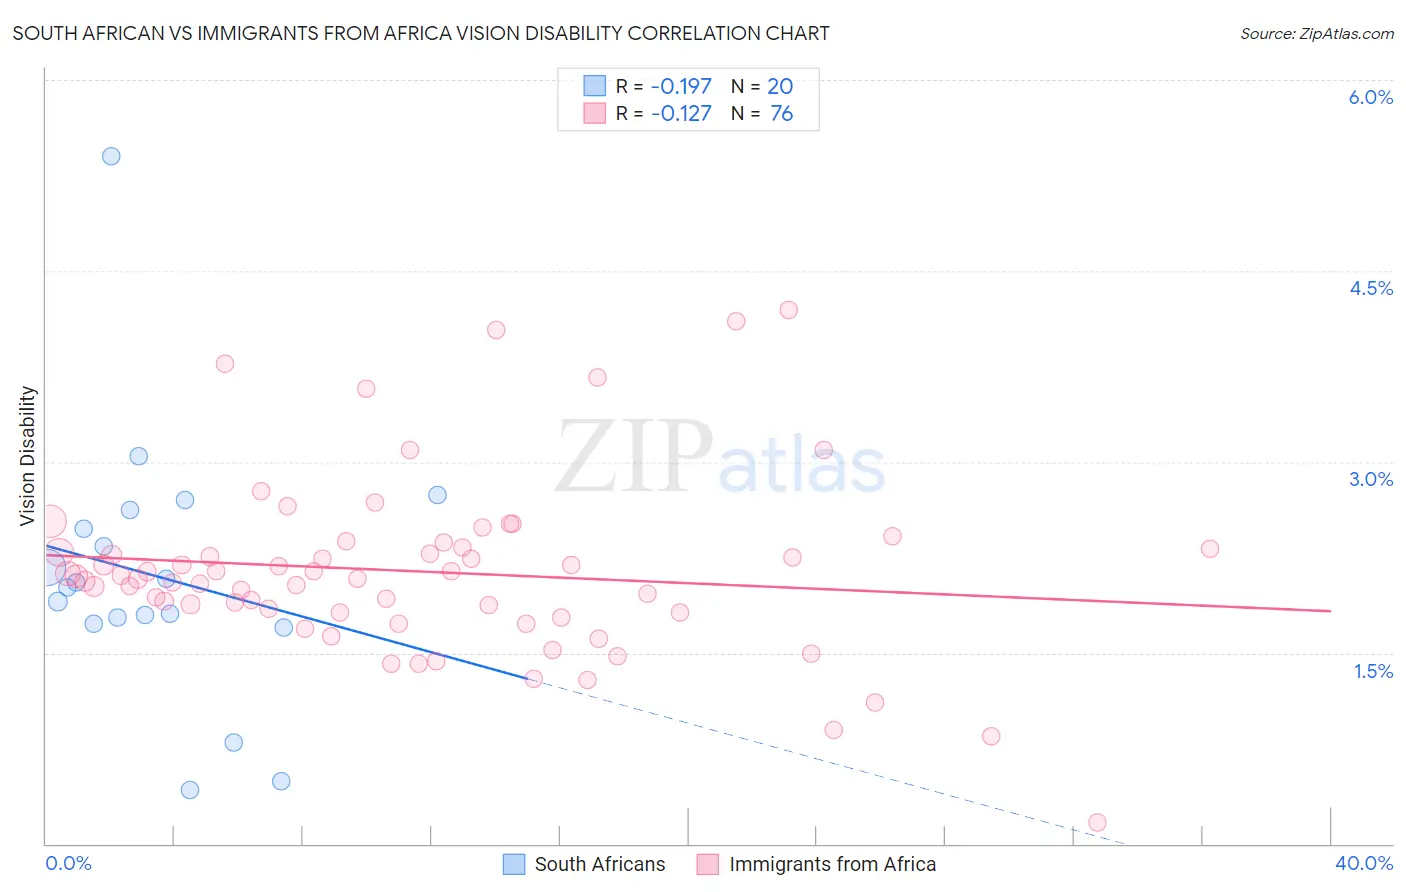 South African vs Immigrants from Africa Vision Disability